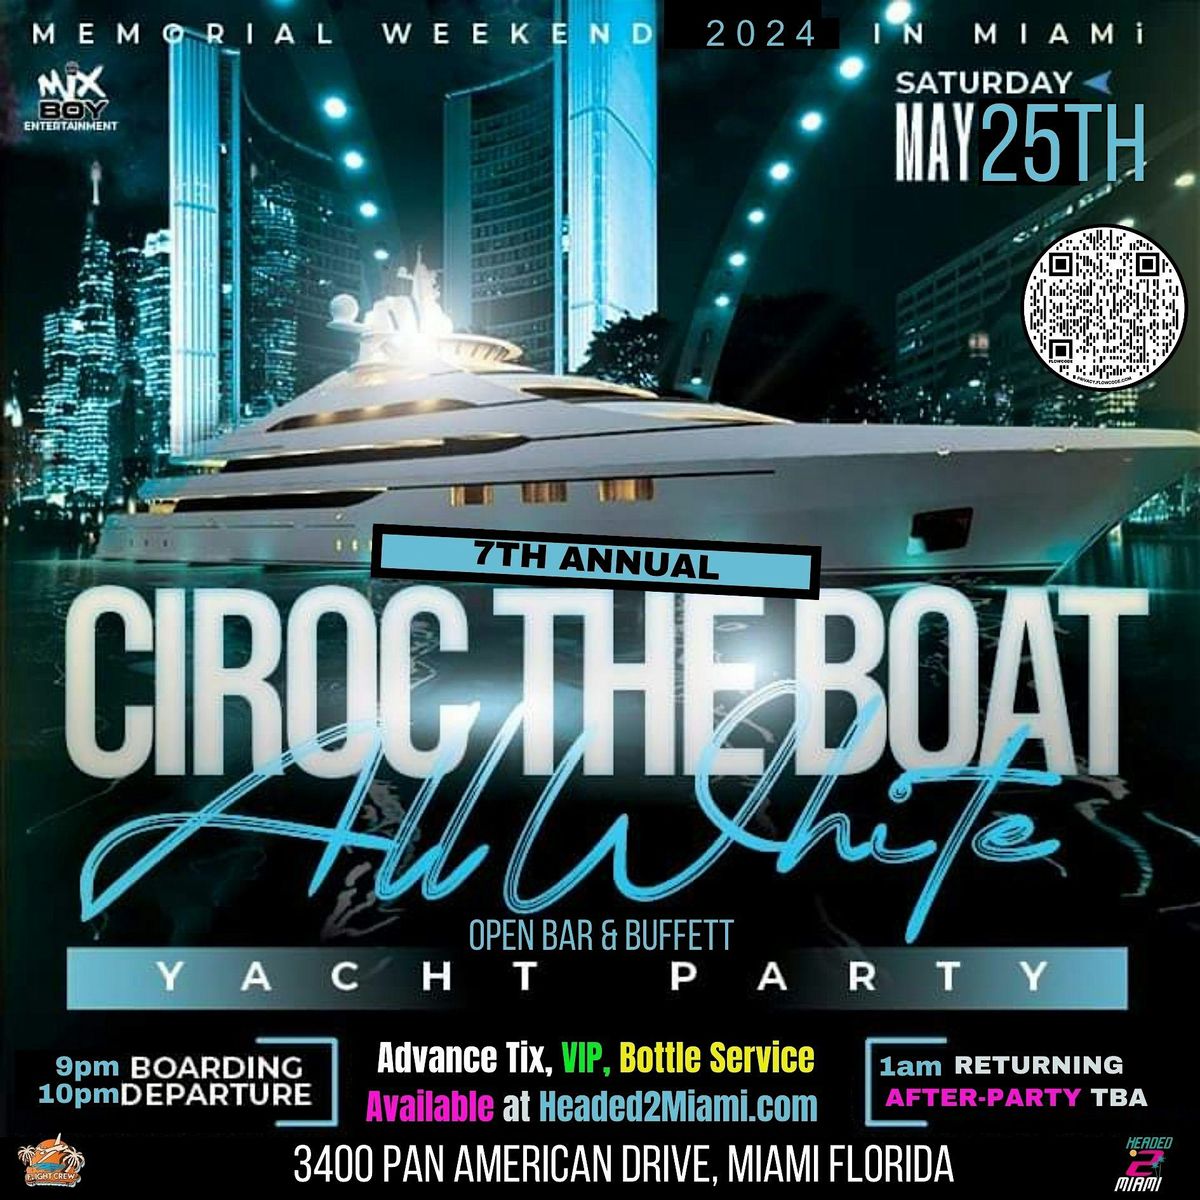 CIROC THE BOAT 2024 (7th Annual All-White Yacht Party)